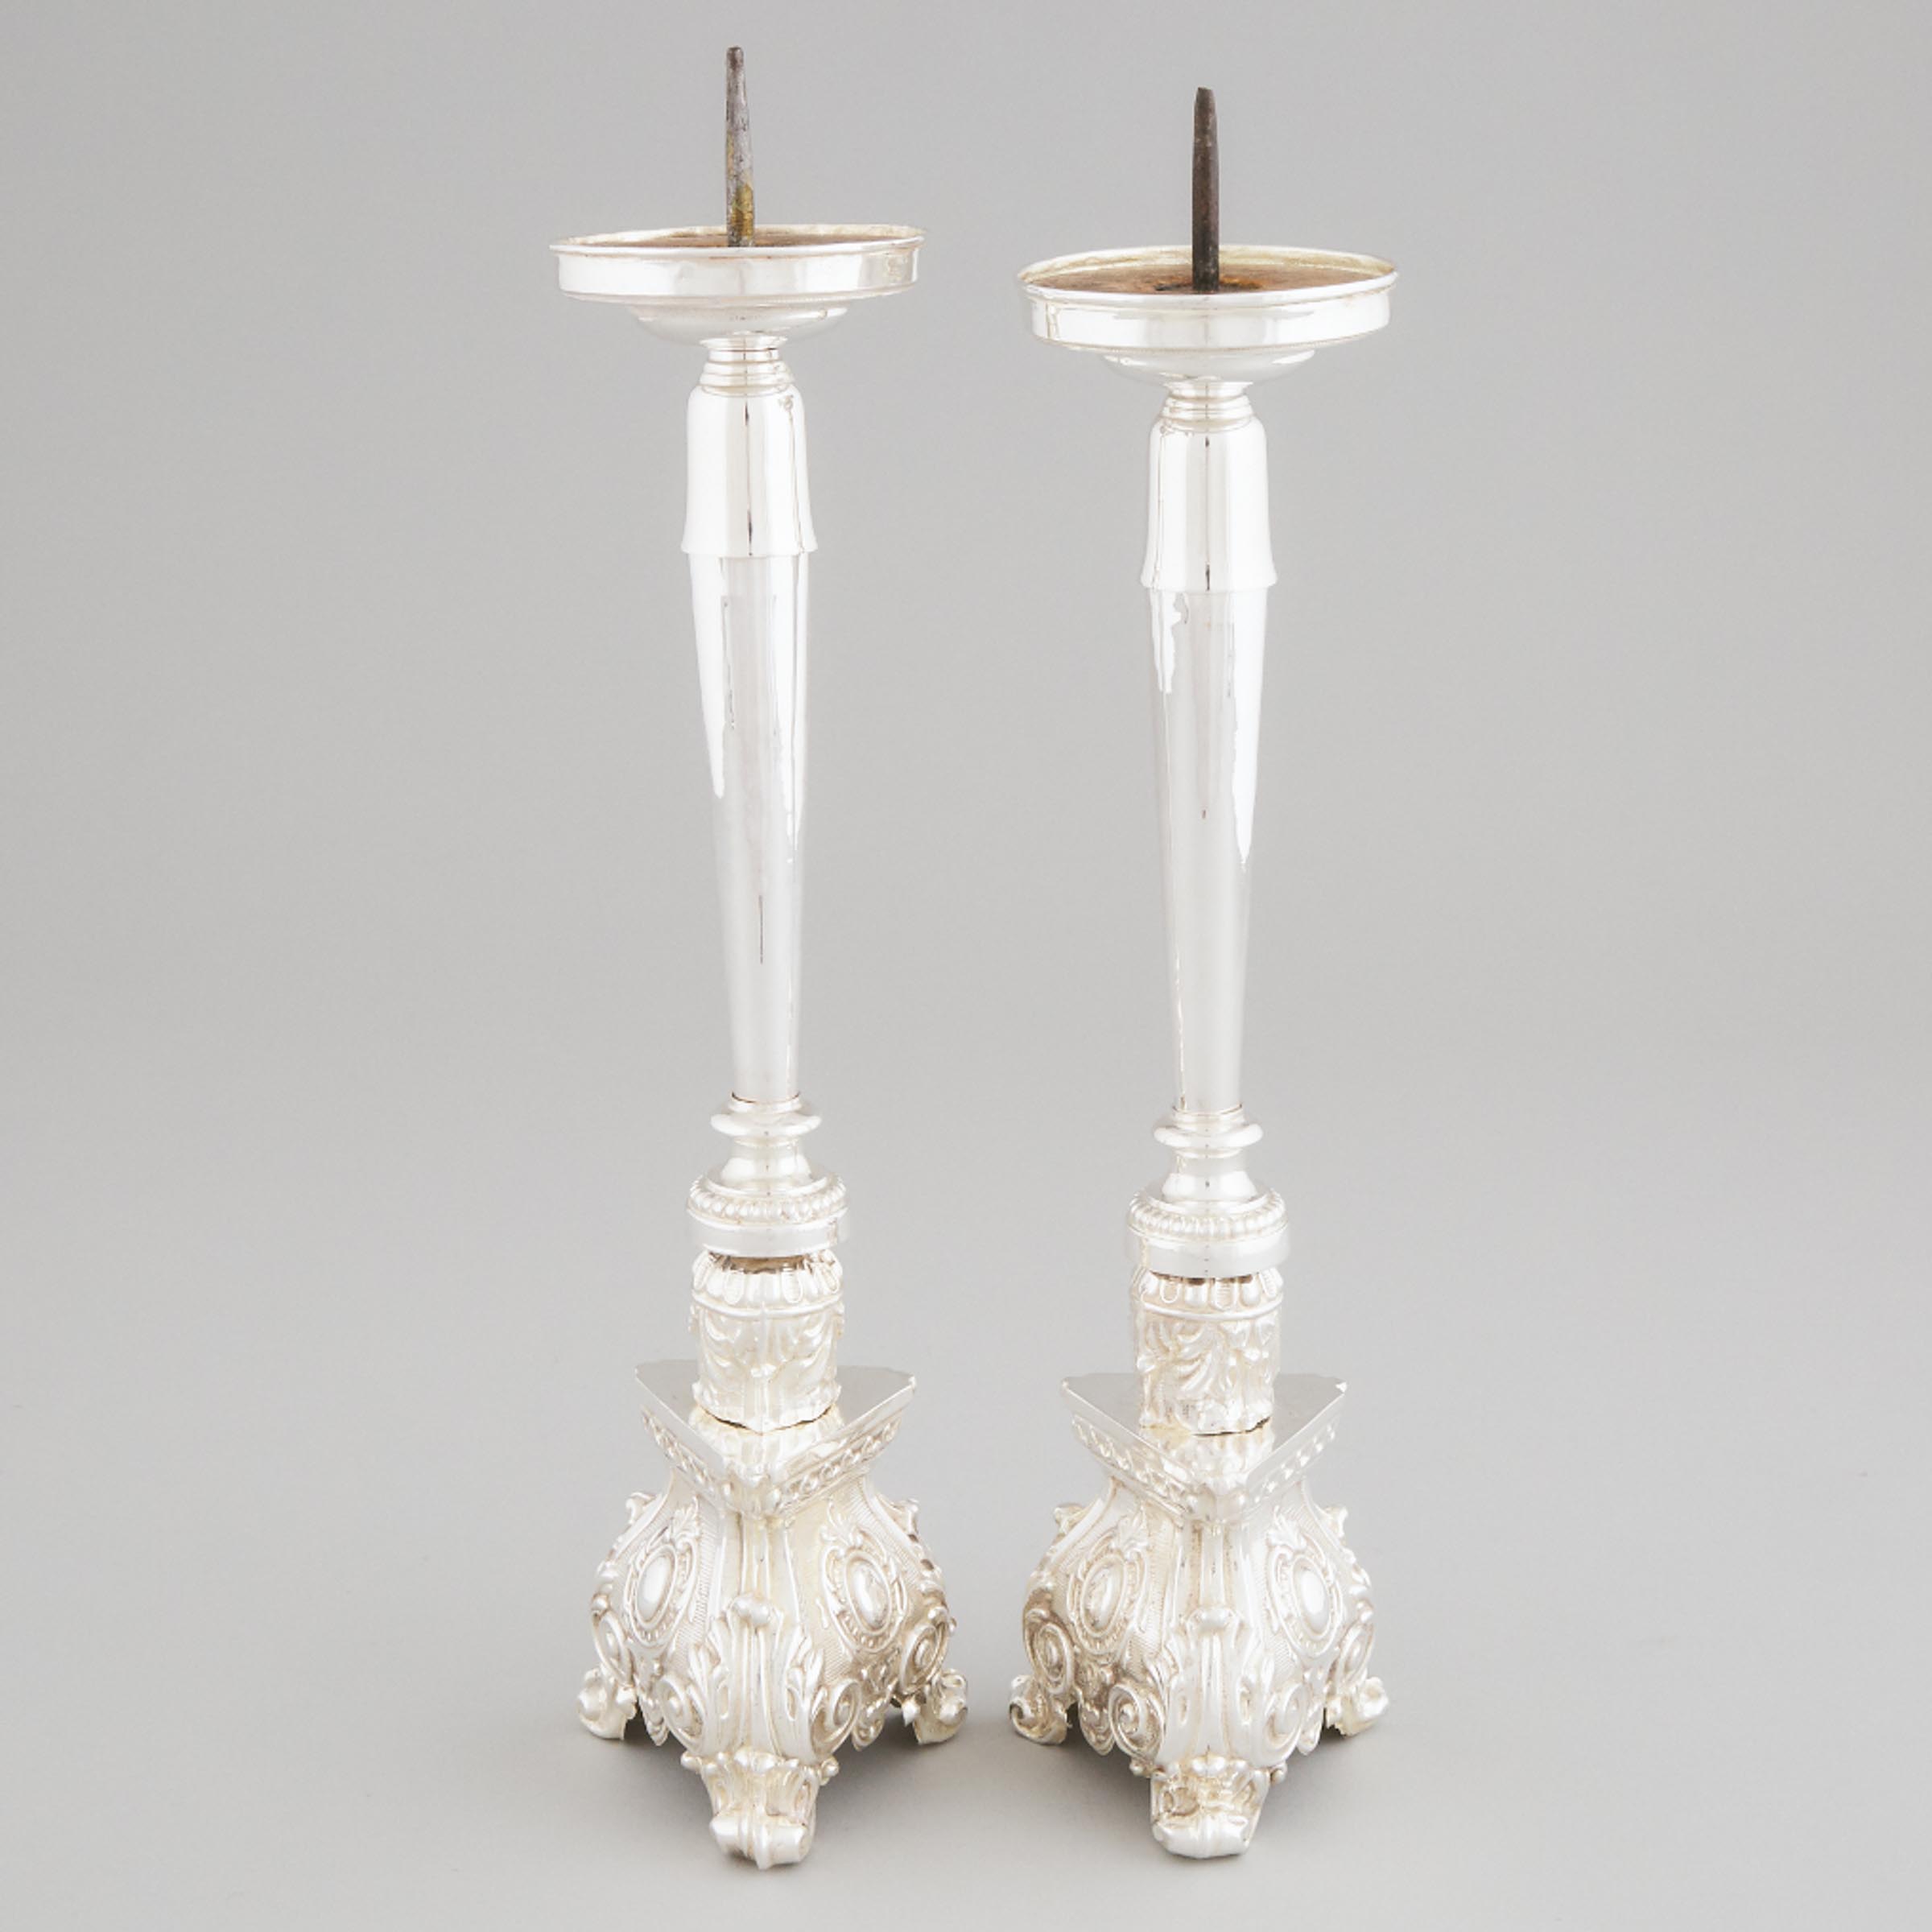 Pair of Continental Silver Plated Pricket Candlesticks, 19th/20th century